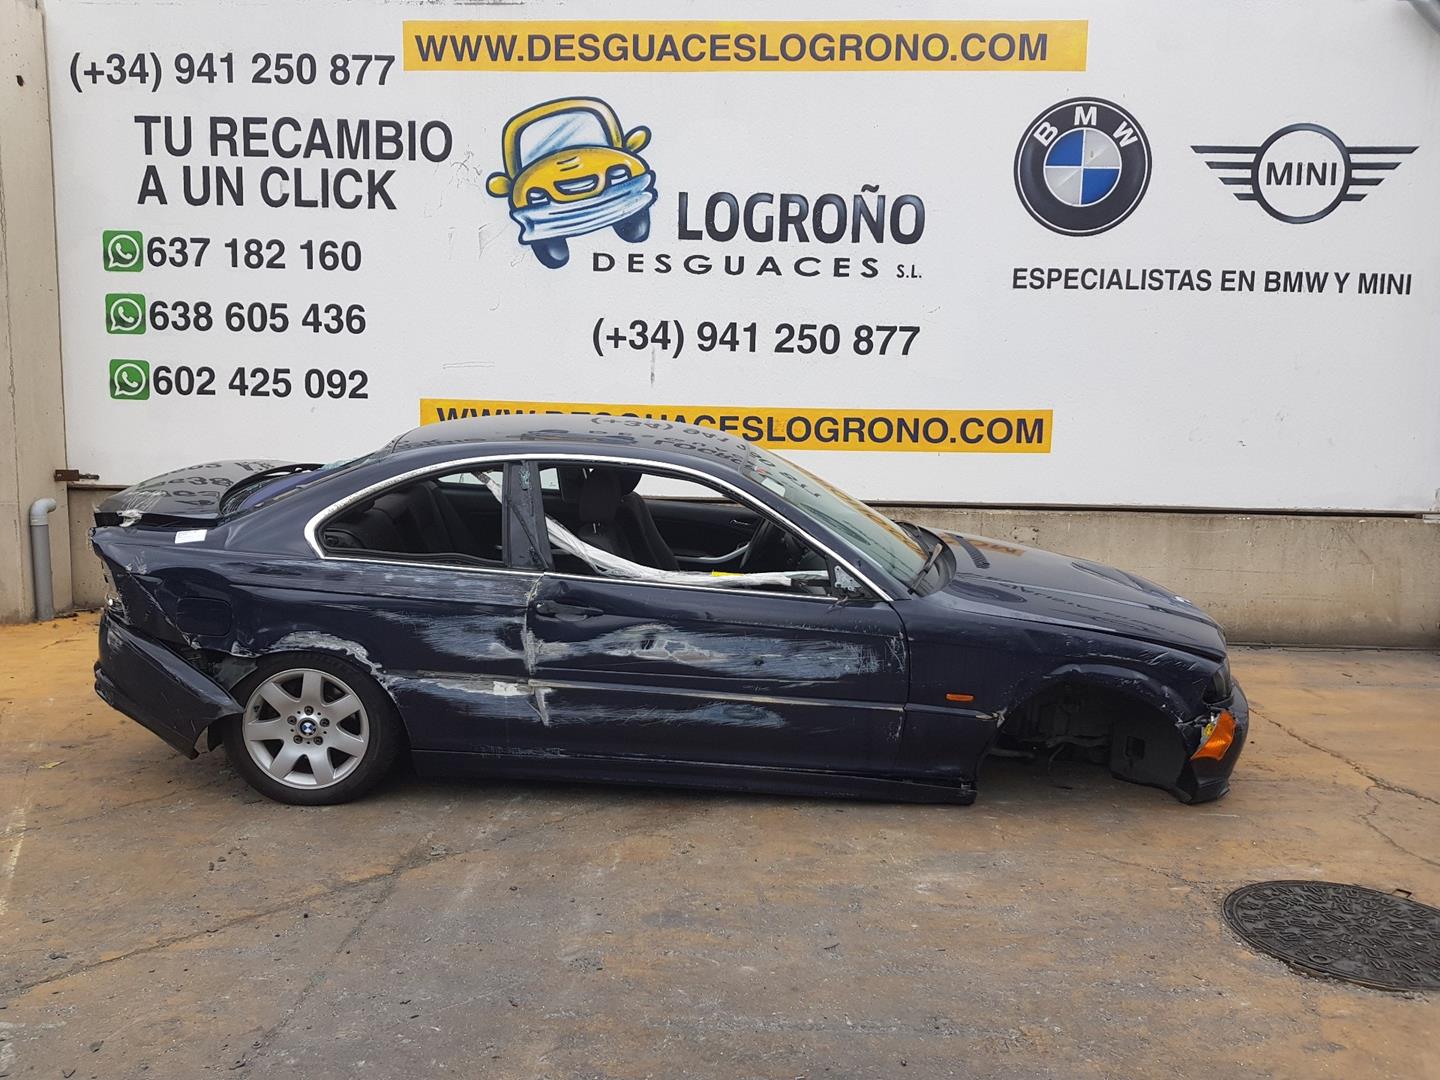 BMW 3 Series E46 (1997-2006) Other Interior Parts 63318364929, 8364929 19872792